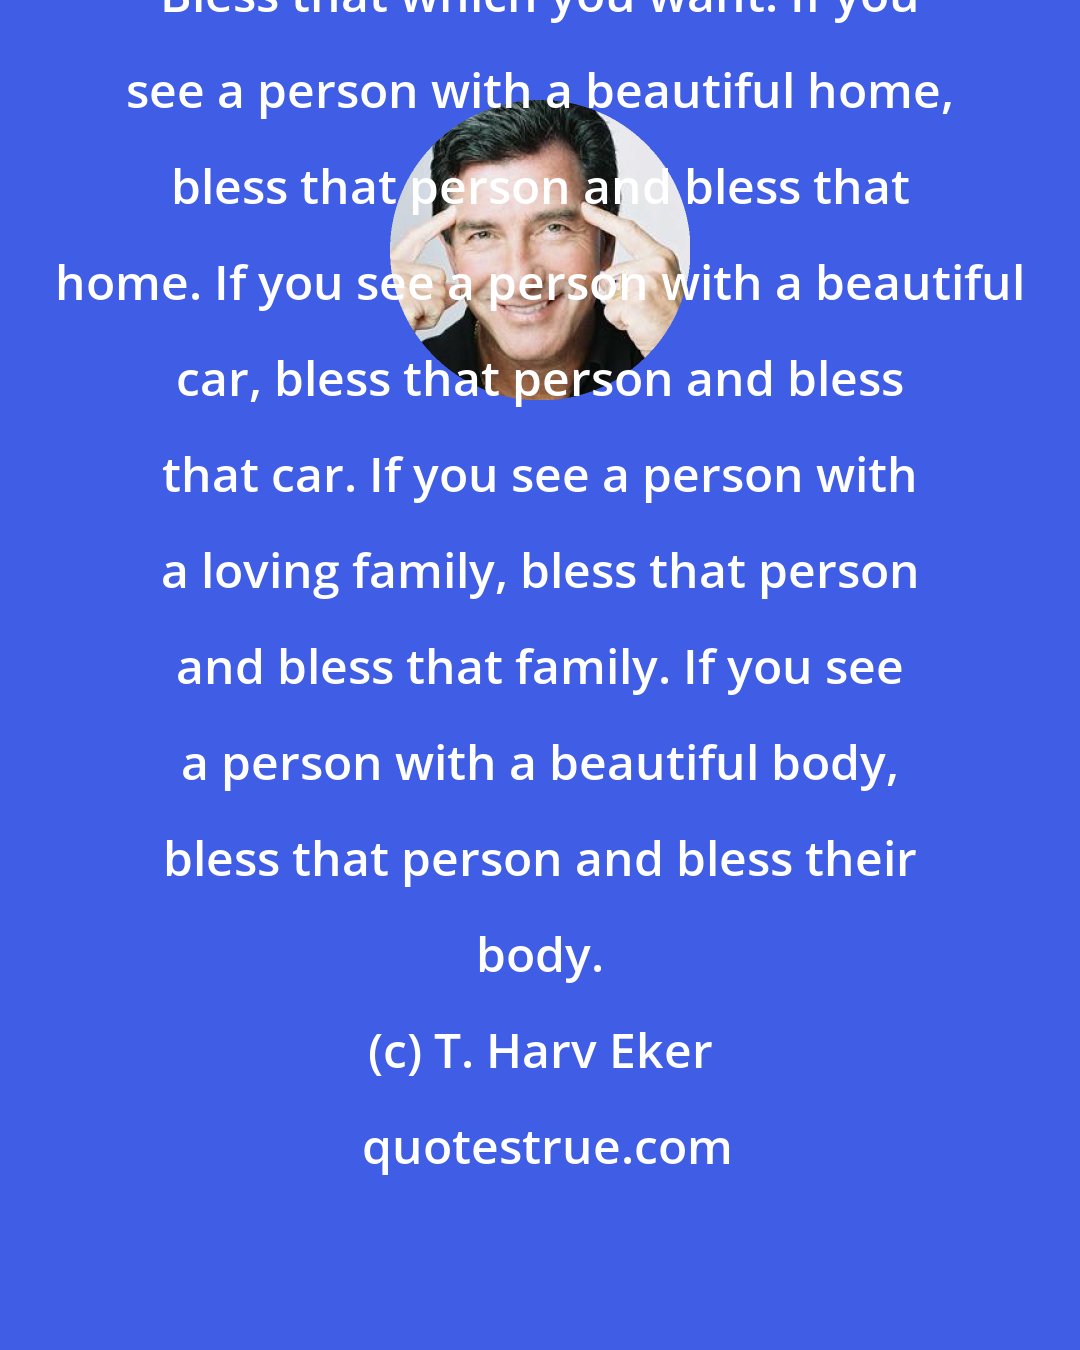 T. Harv Eker: Bless that which you want. If you see a person with a beautiful home, bless that person and bless that home. If you see a person with a beautiful car, bless that person and bless that car. If you see a person with a loving family, bless that person and bless that family. If you see a person with a beautiful body, bless that person and bless their body.